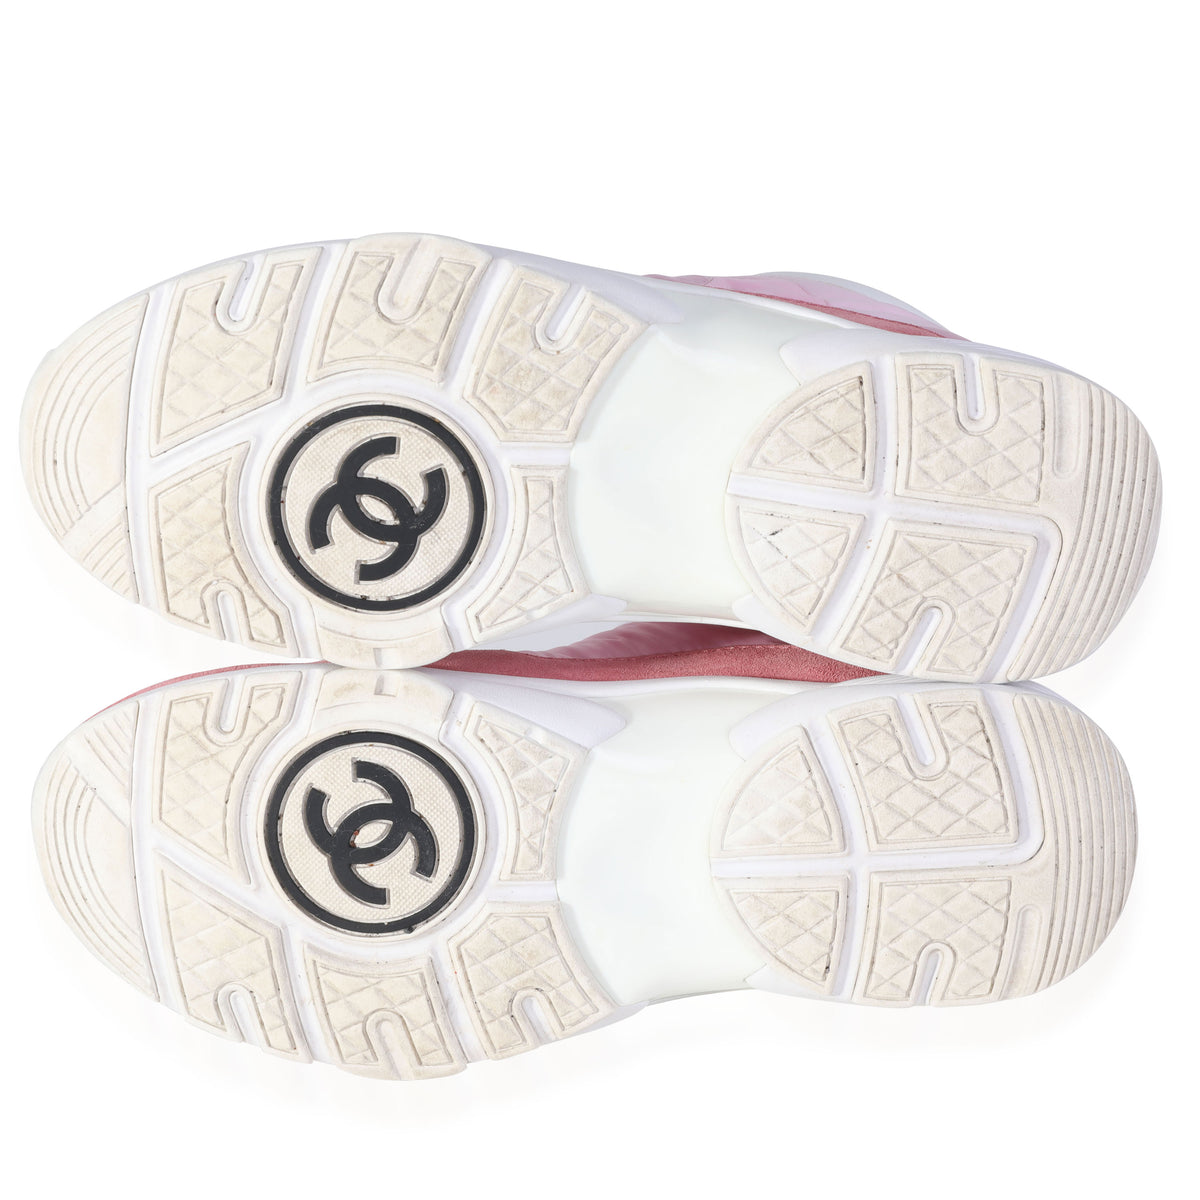 Chanel Knit & Suede Calfskin Light Pink / White / Black Low Top